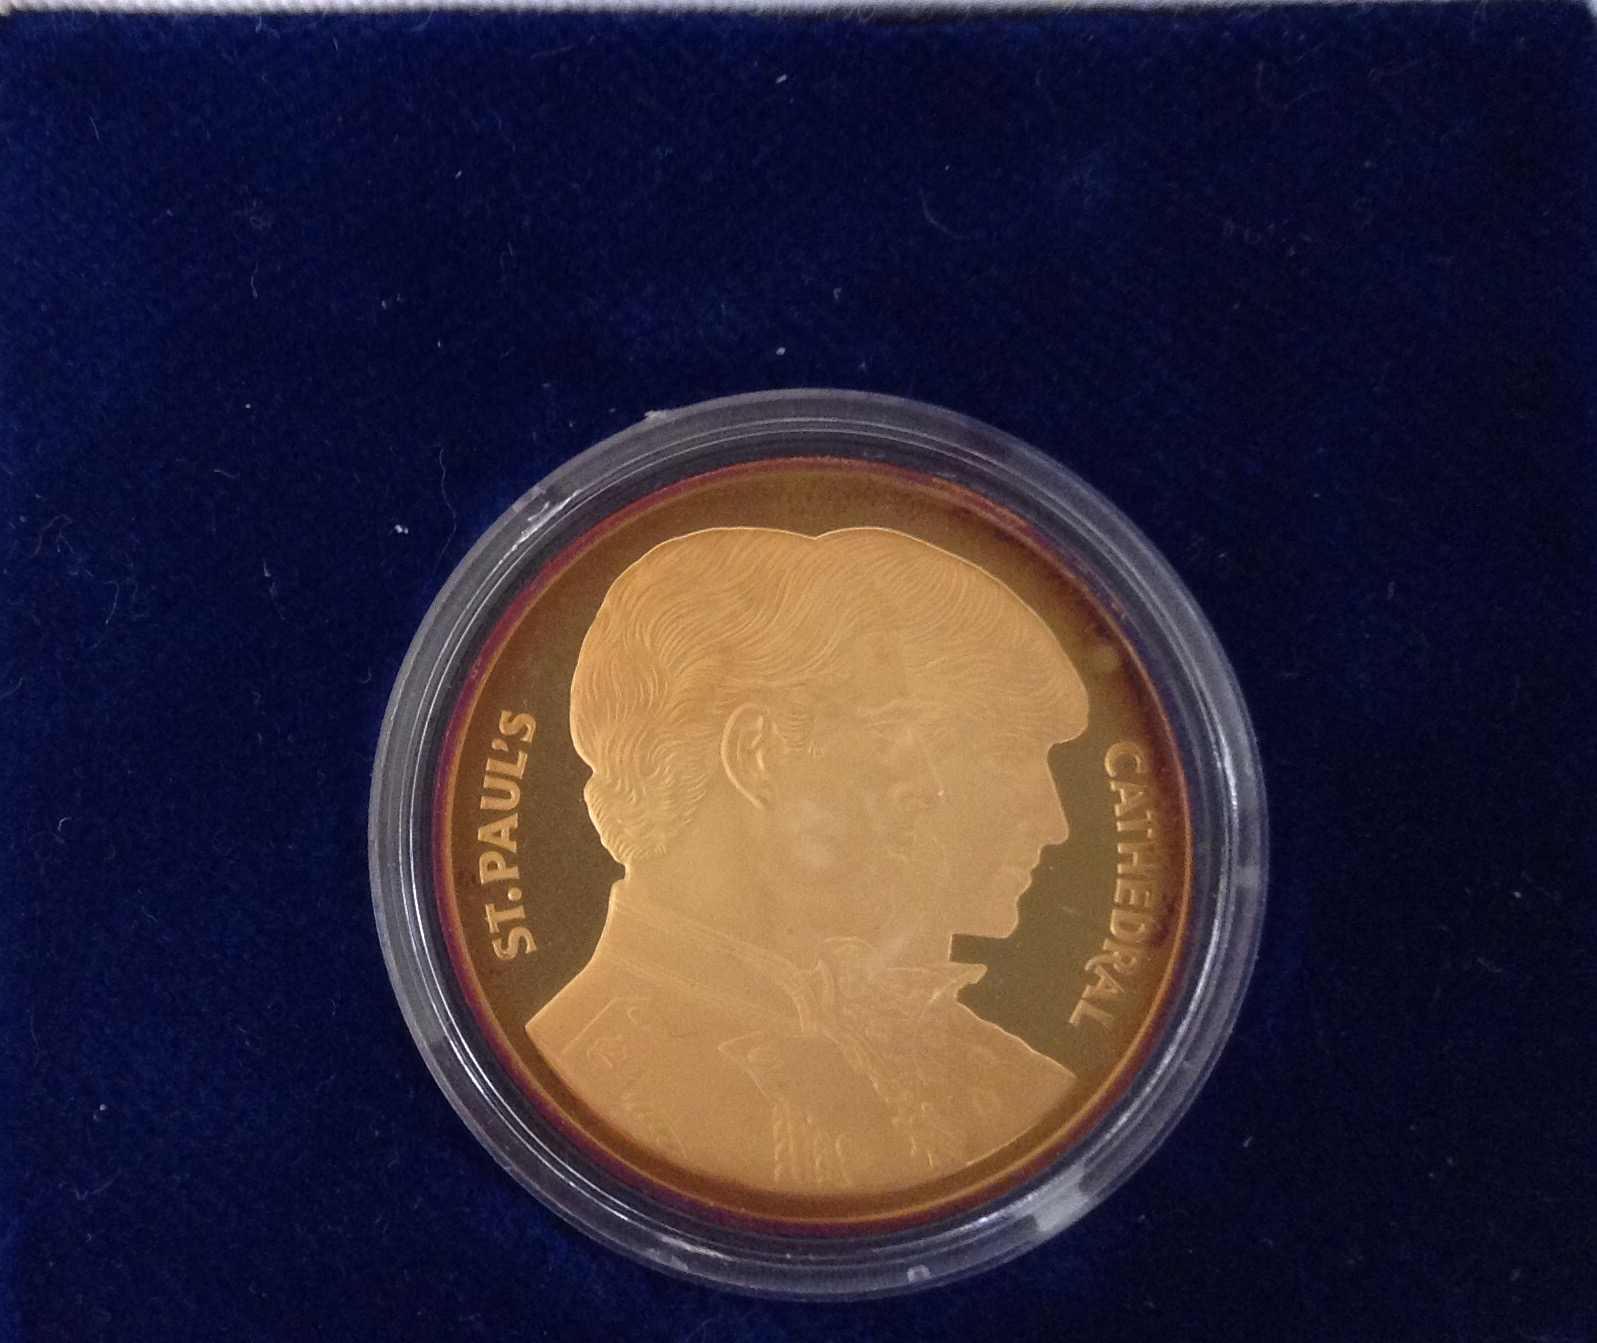 A 20TH CENTURY 24CT GOLD ONE TROY OUNCE COMMEMORATIVE COIN Celebrating the marriage of Prince - Image 3 of 3